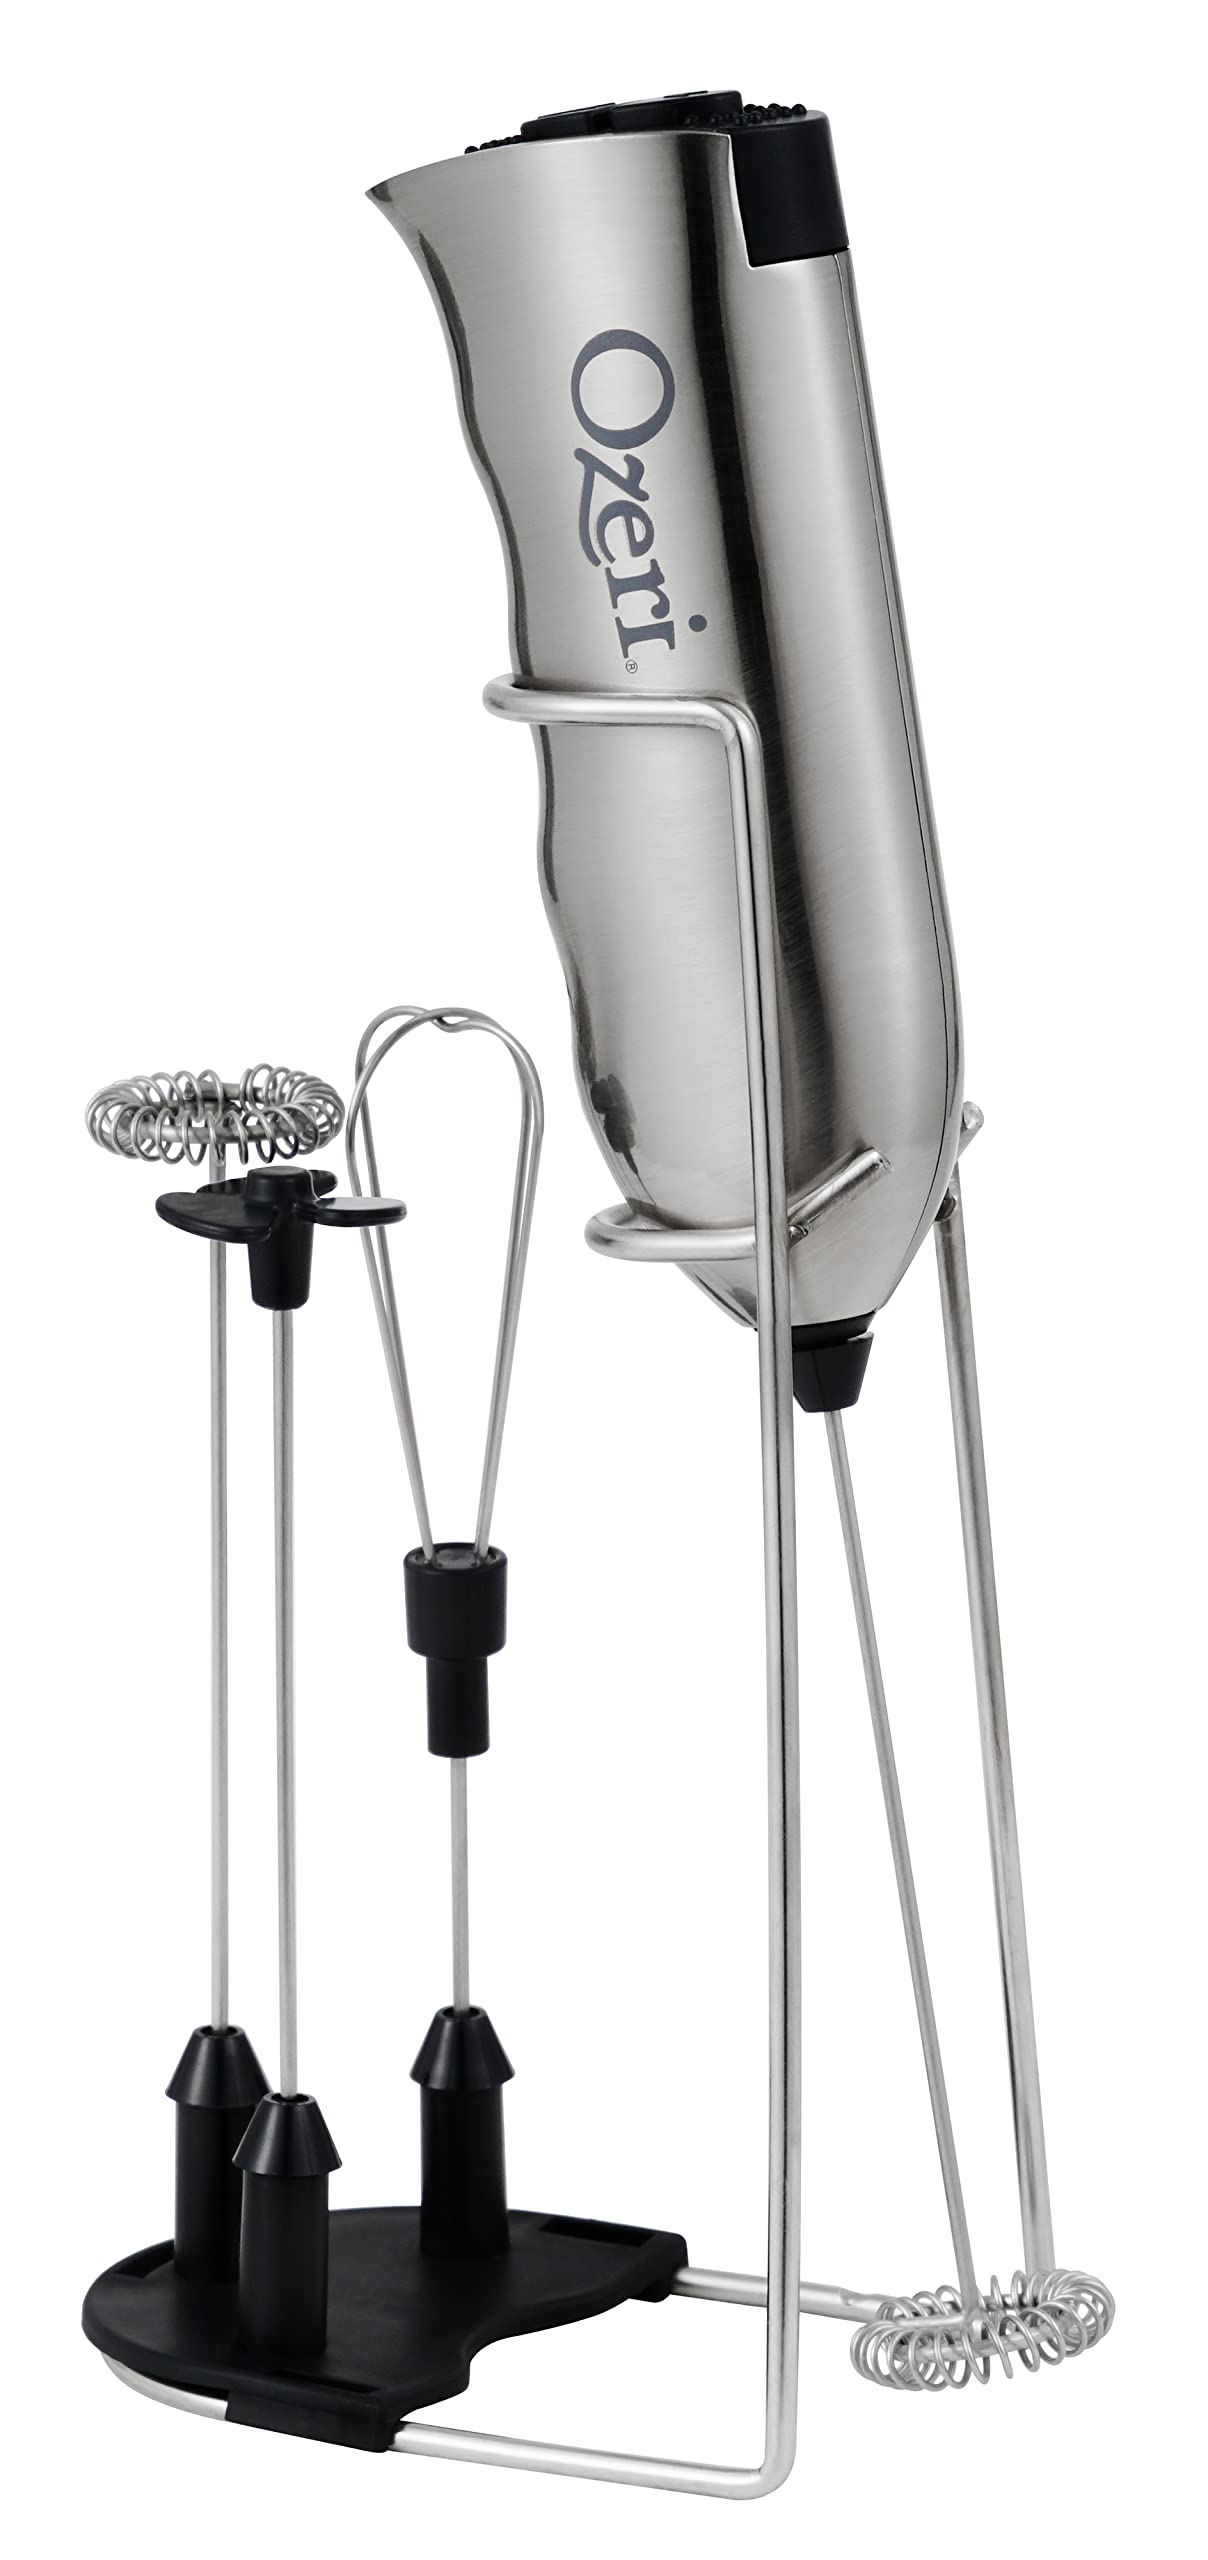 Ozeri Deluxe Milk Frother and Whisk in Stainless Steel with Stand and 4-Frothing Attachments